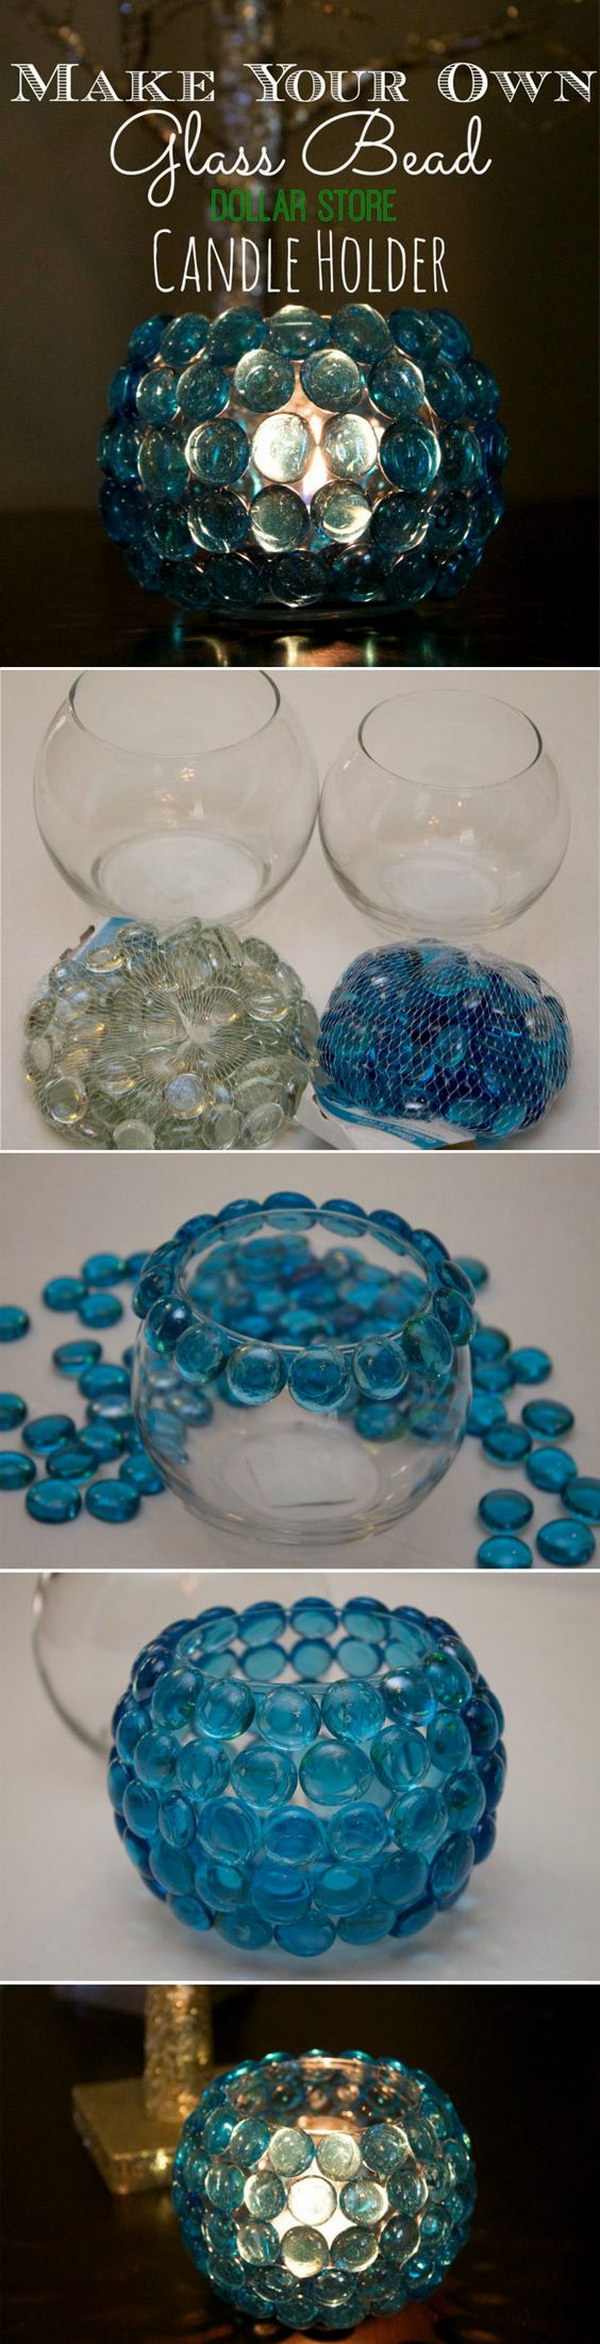 DIY Candle Holder Wedding Centerpieces With Glass Bead 